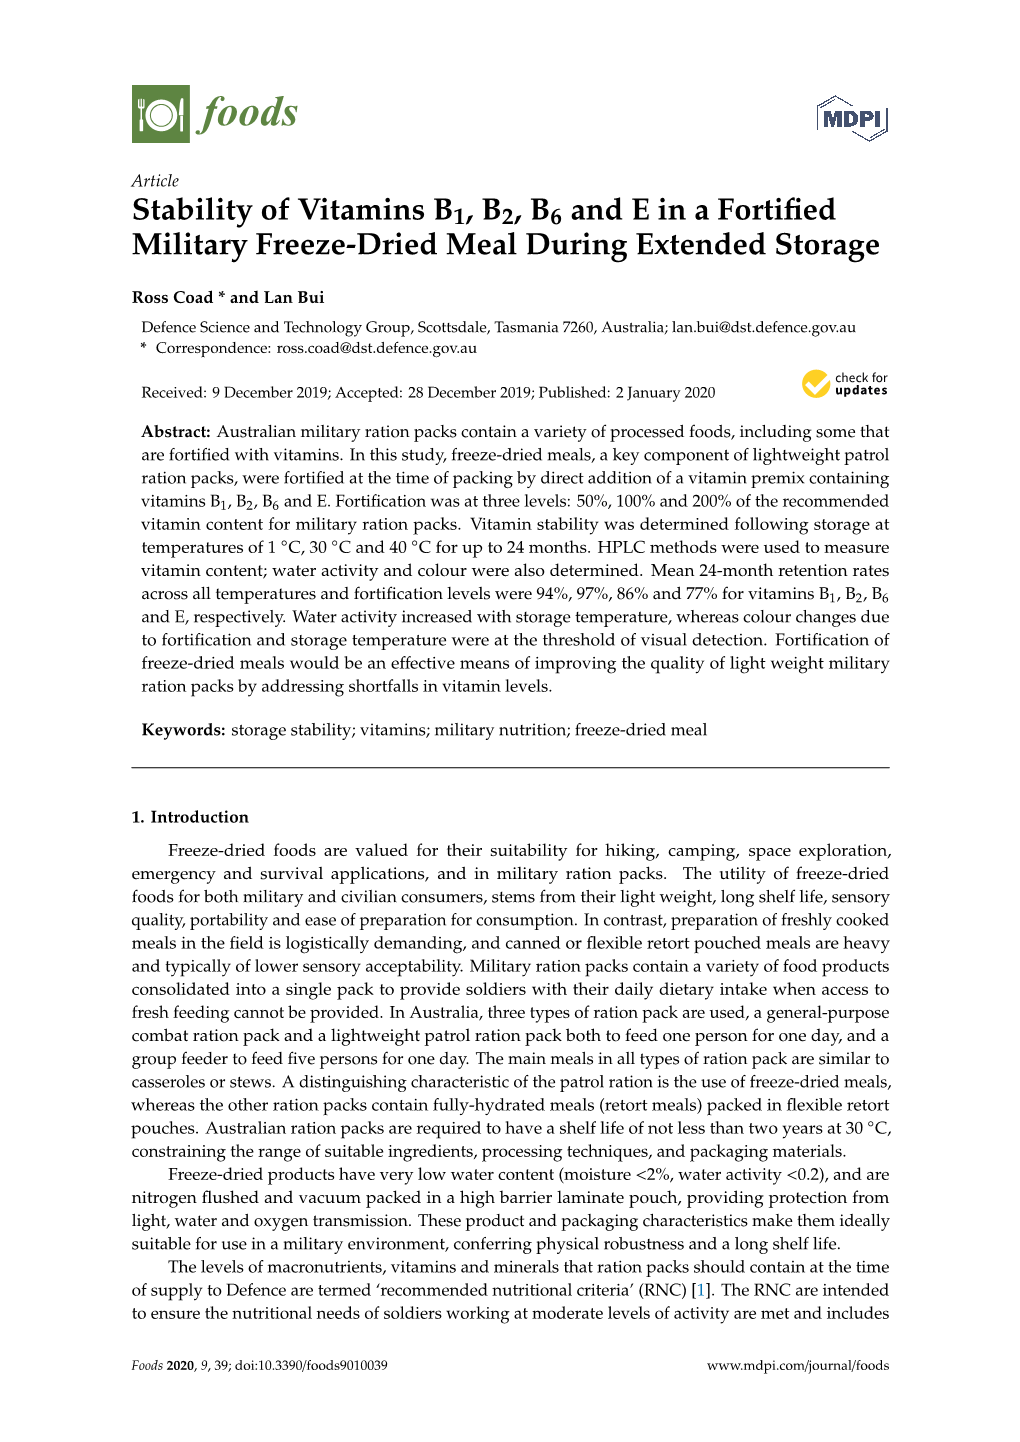 Stability of Vitamins B1, B2, B6 and E in a Fortified Military Freeze-Dried